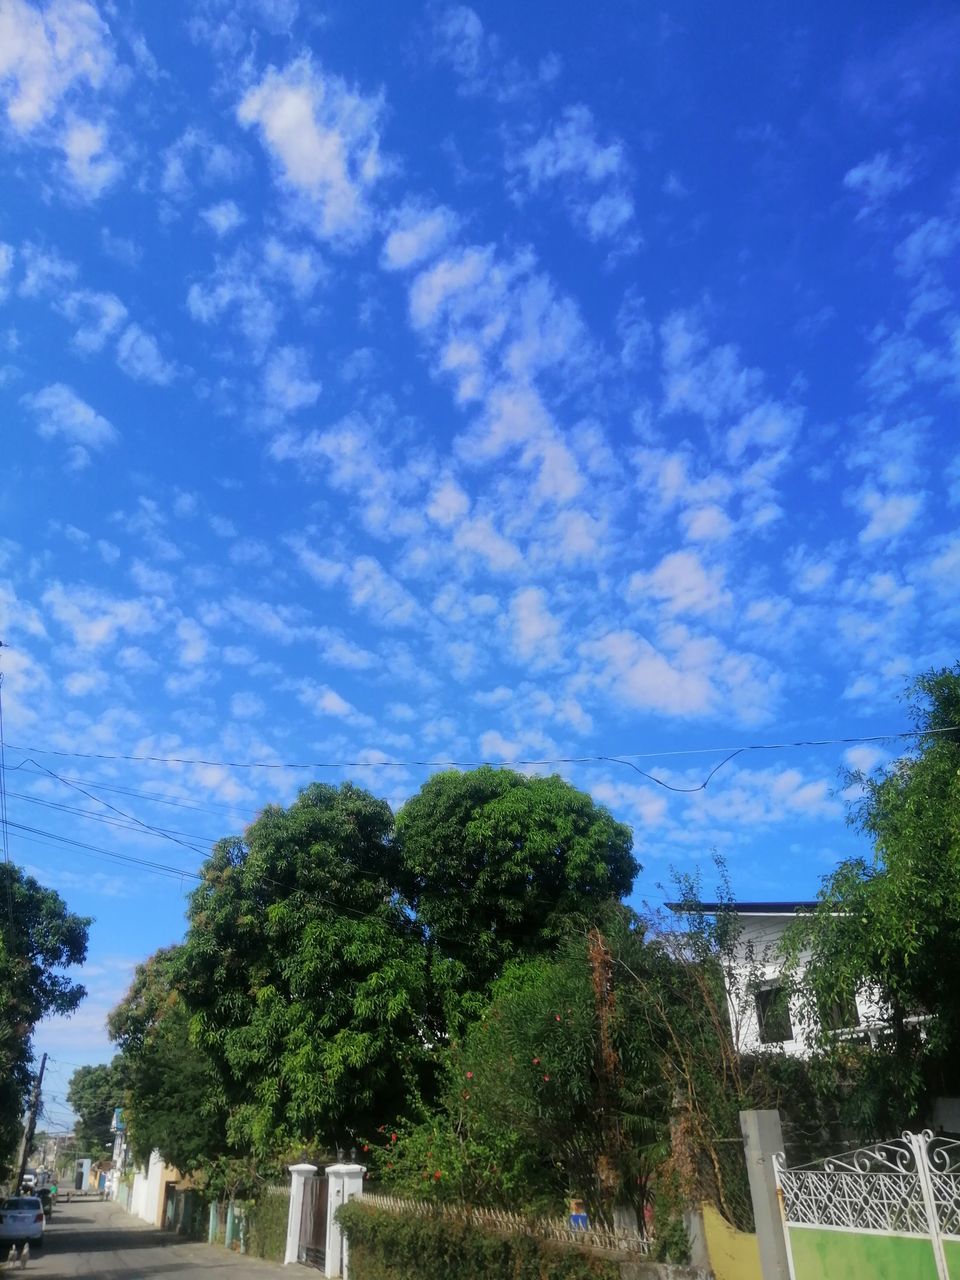 tree, plant, sky, cloud, nature, architecture, built structure, day, blue, no people, building exterior, outdoors, city, residential area, transportation, road, growth, green, street